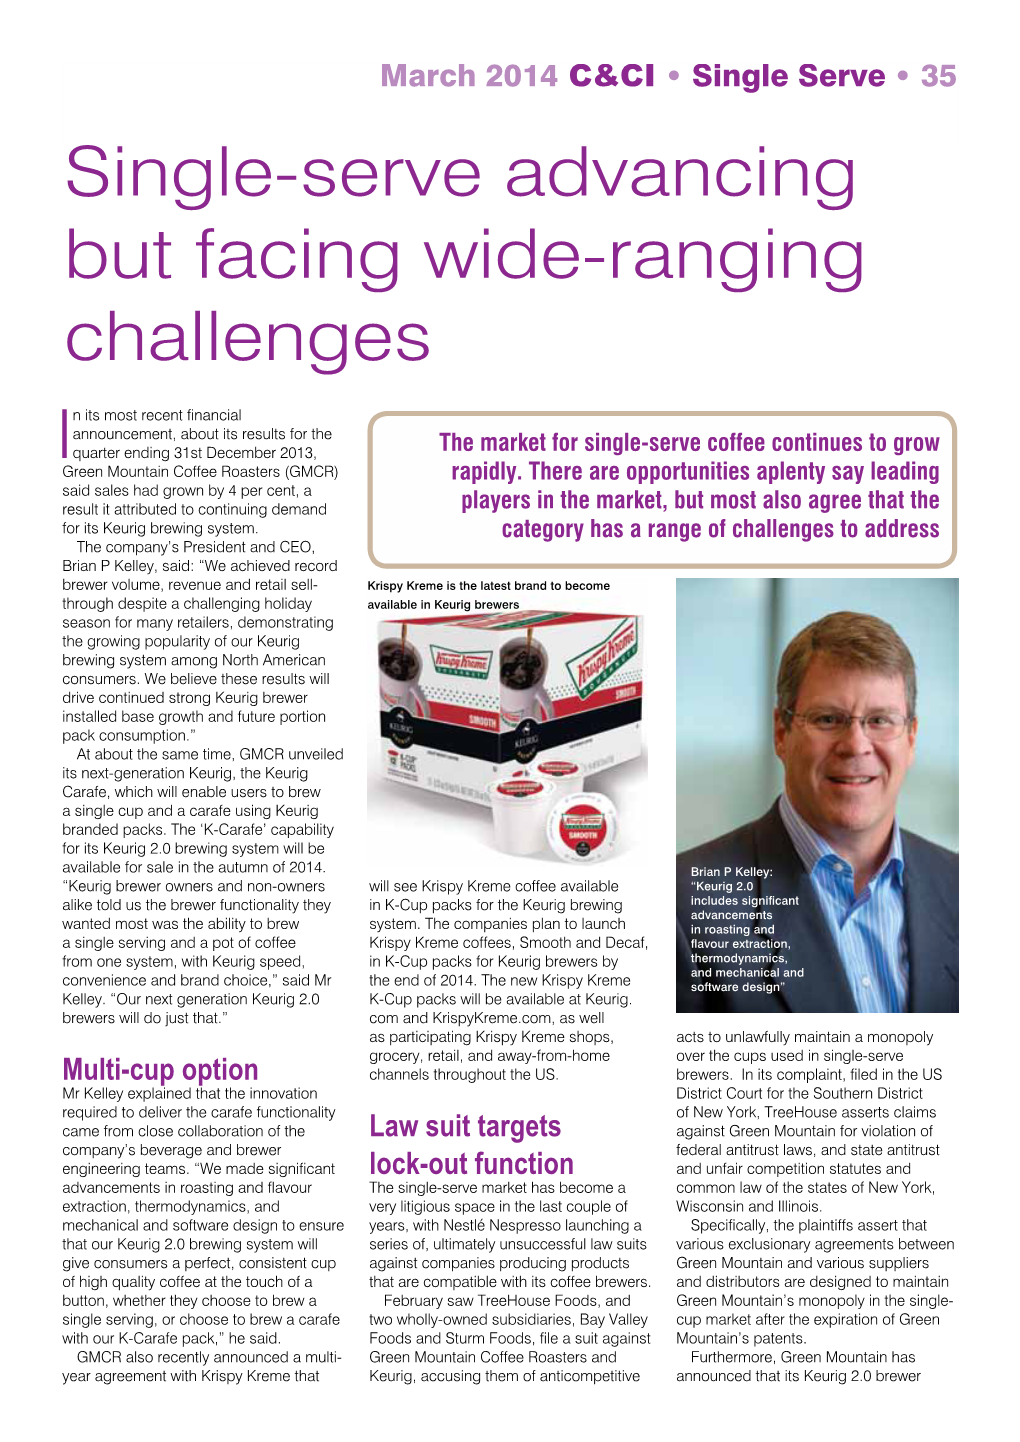 Single-Serve Advancing but Facing Wide-Ranging Challenges